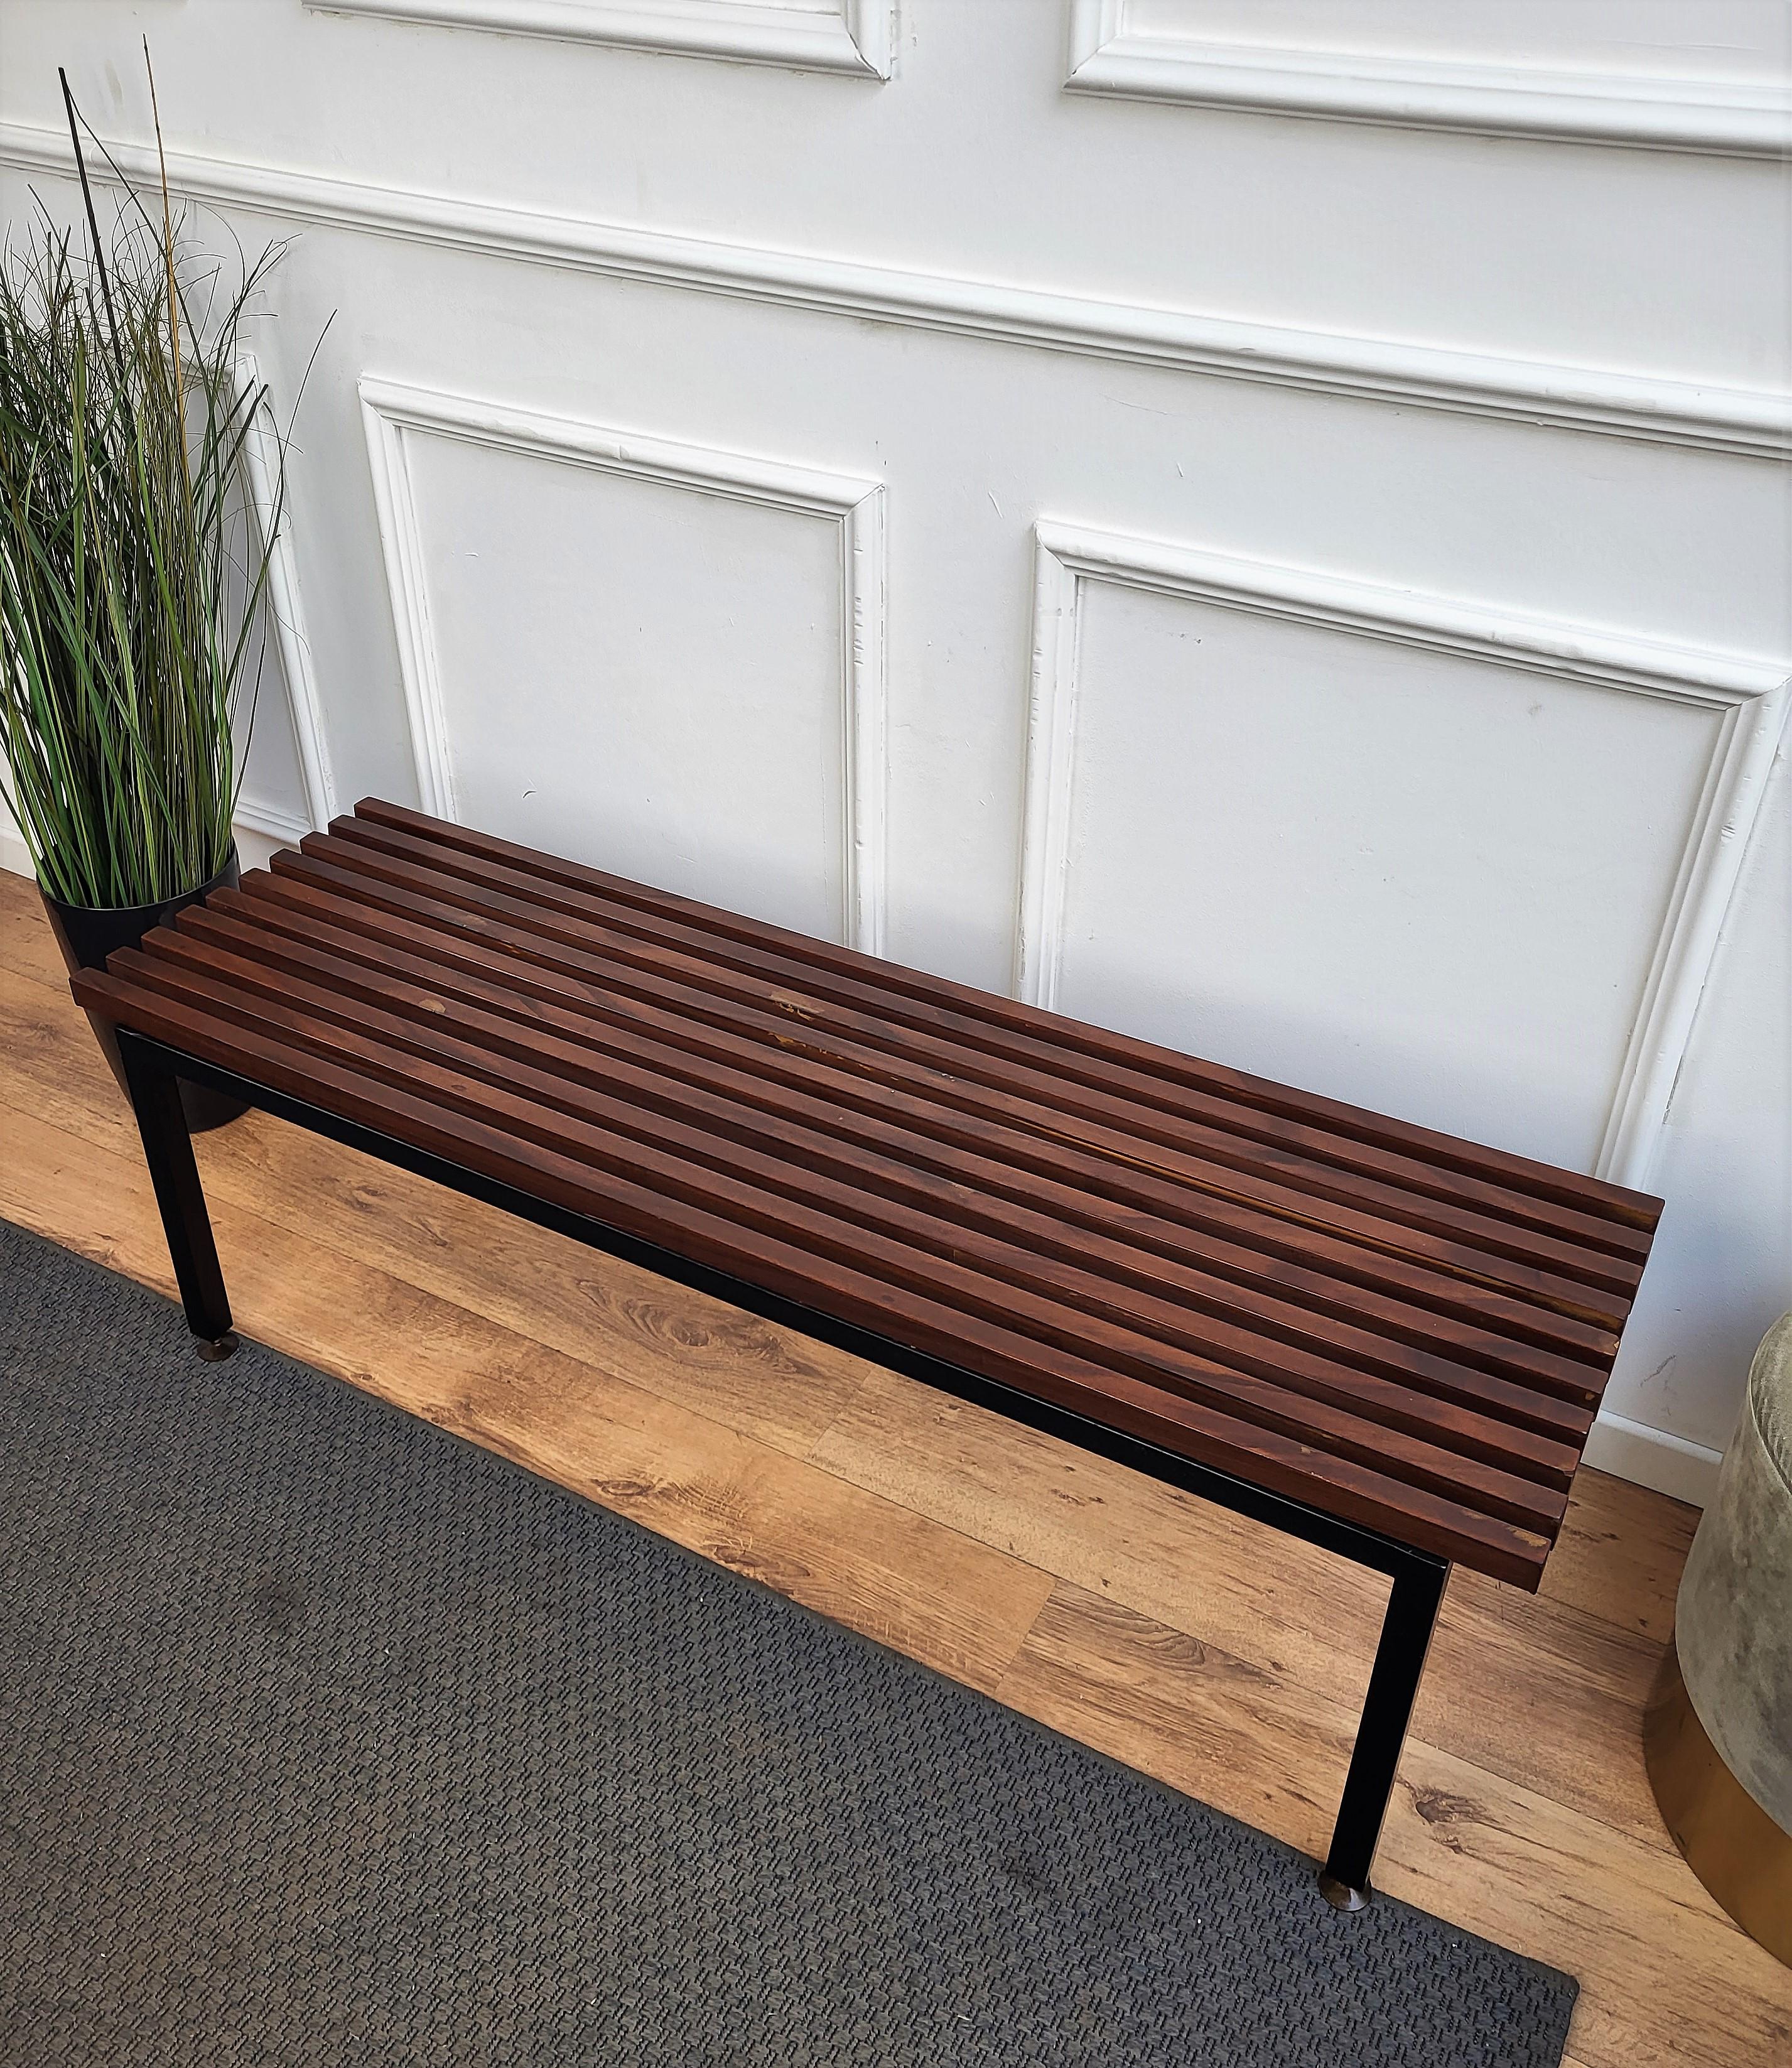 Mid-Century Modern Italian Metal Base Brass Feet Wooden Slat Bench In Good Condition For Sale In Carimate, Como